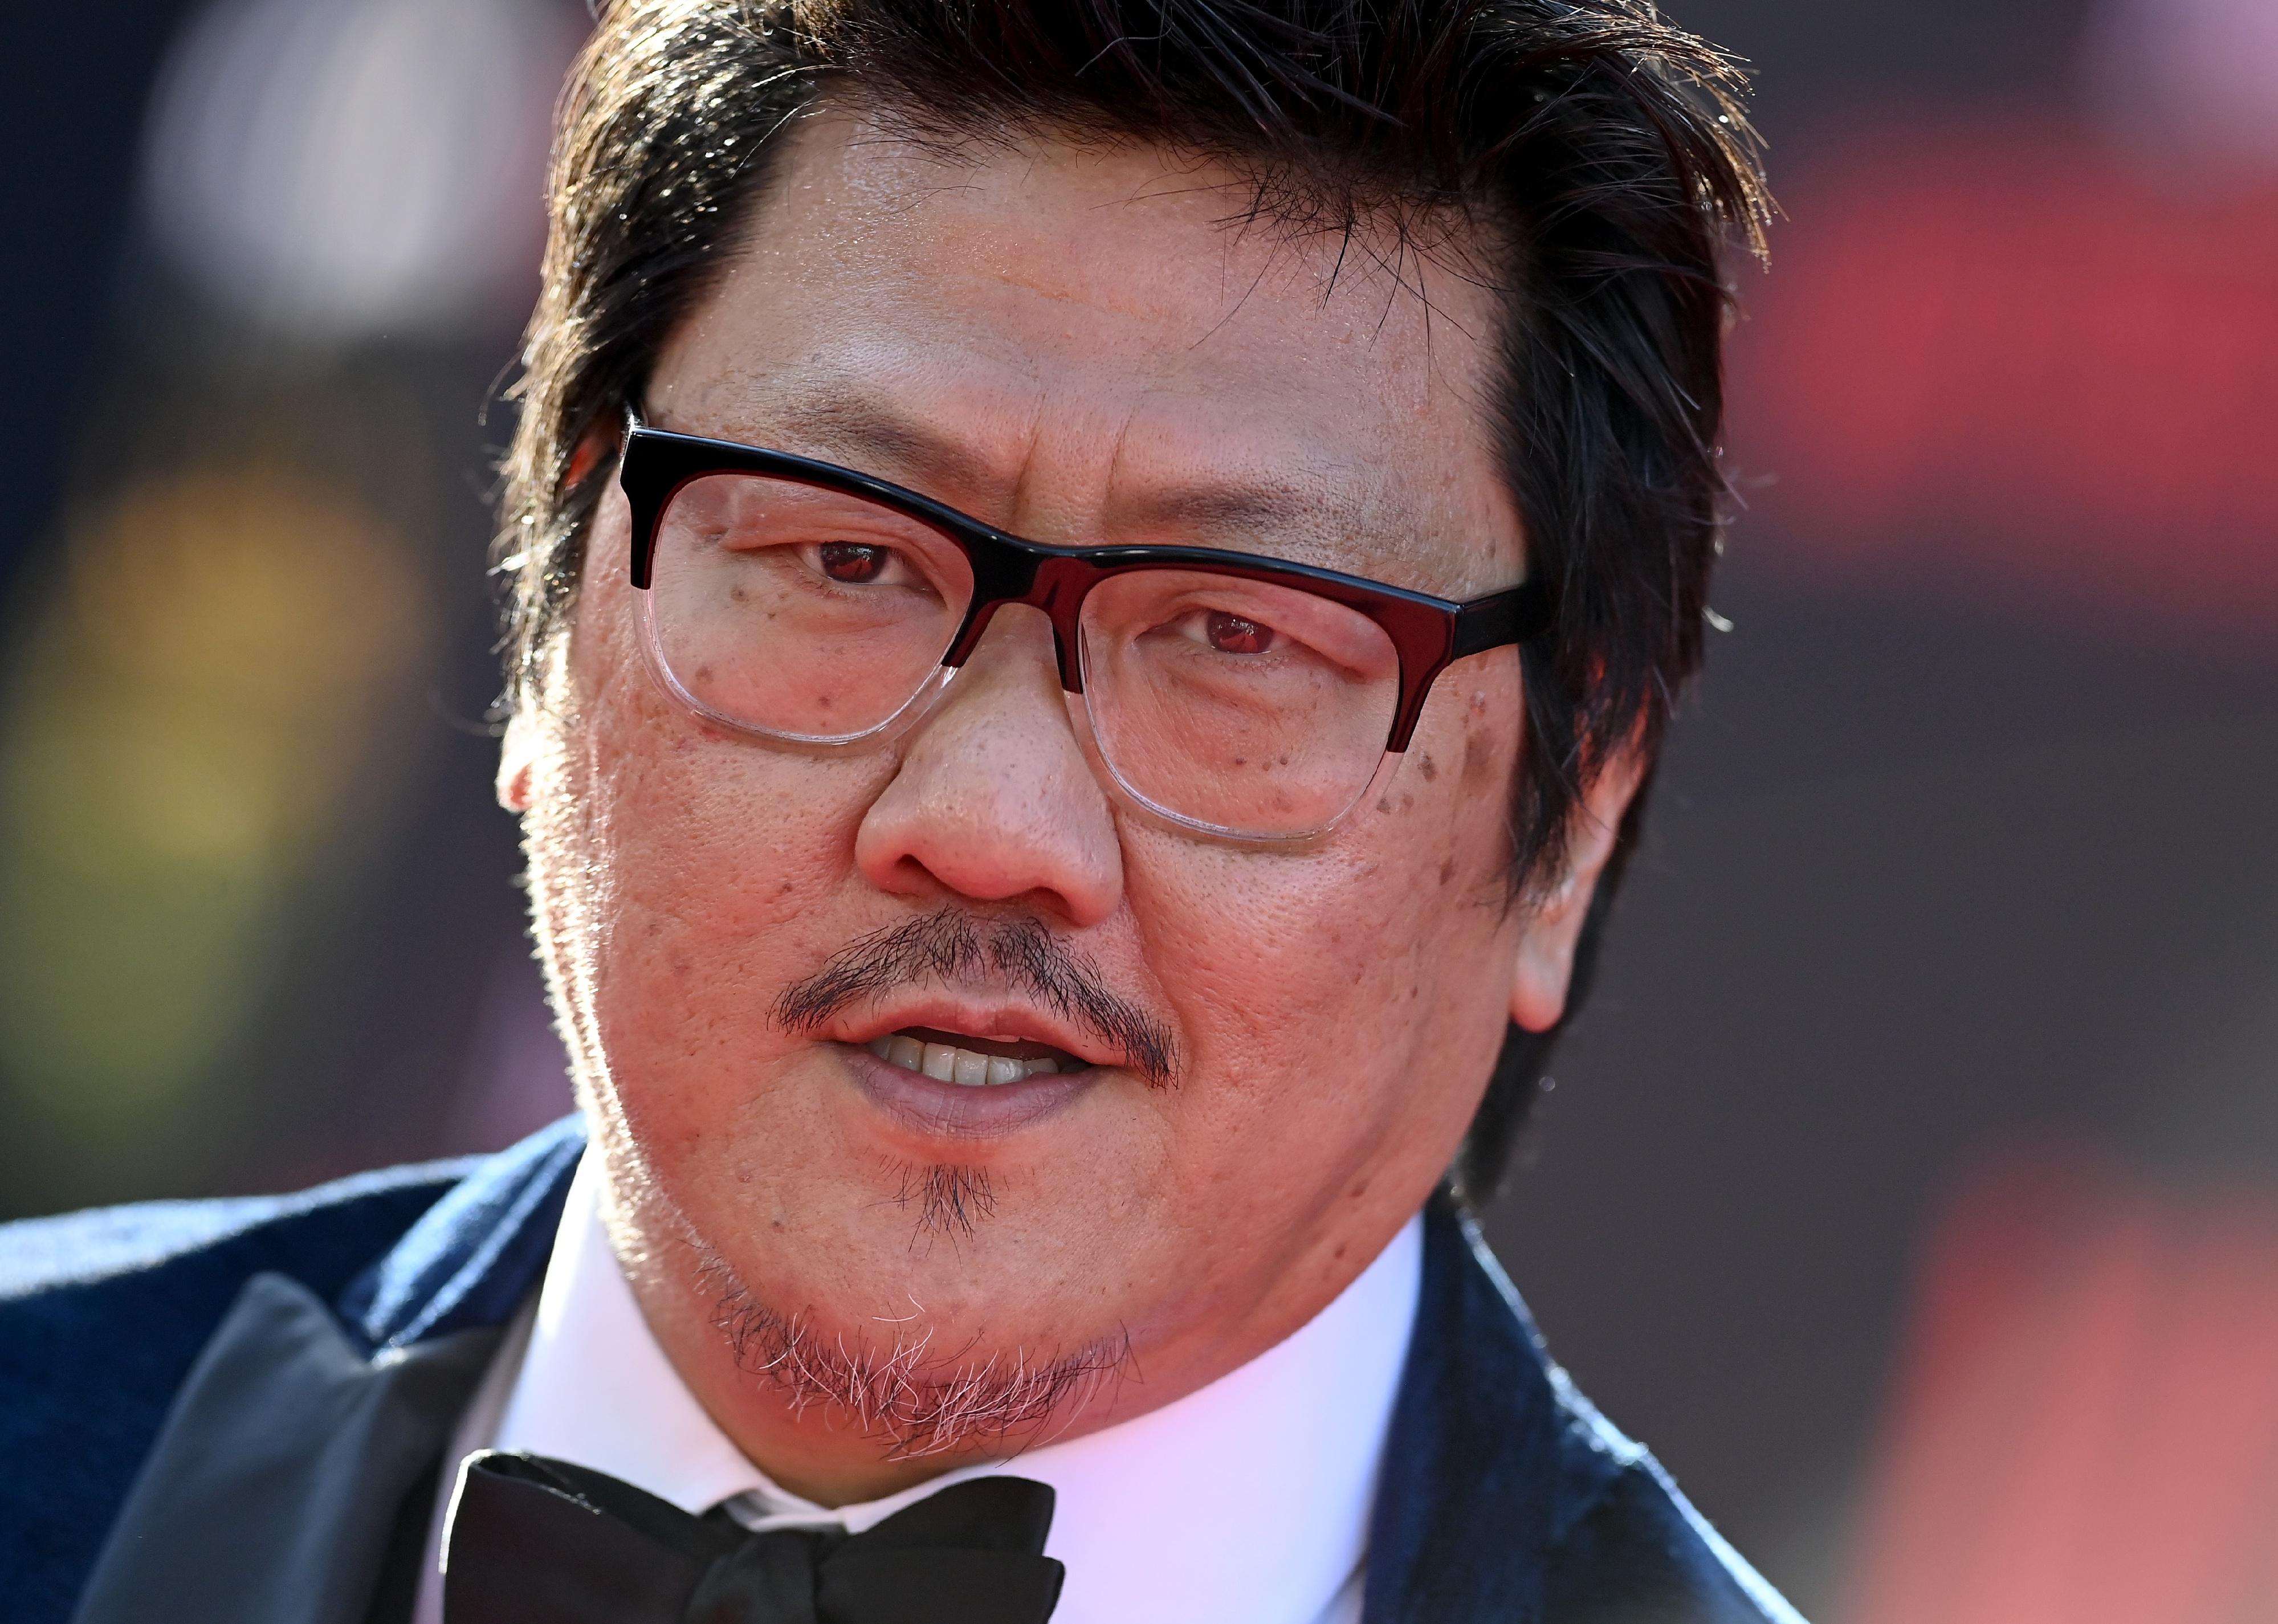 Benedict Wong in a black suit and bowtie.